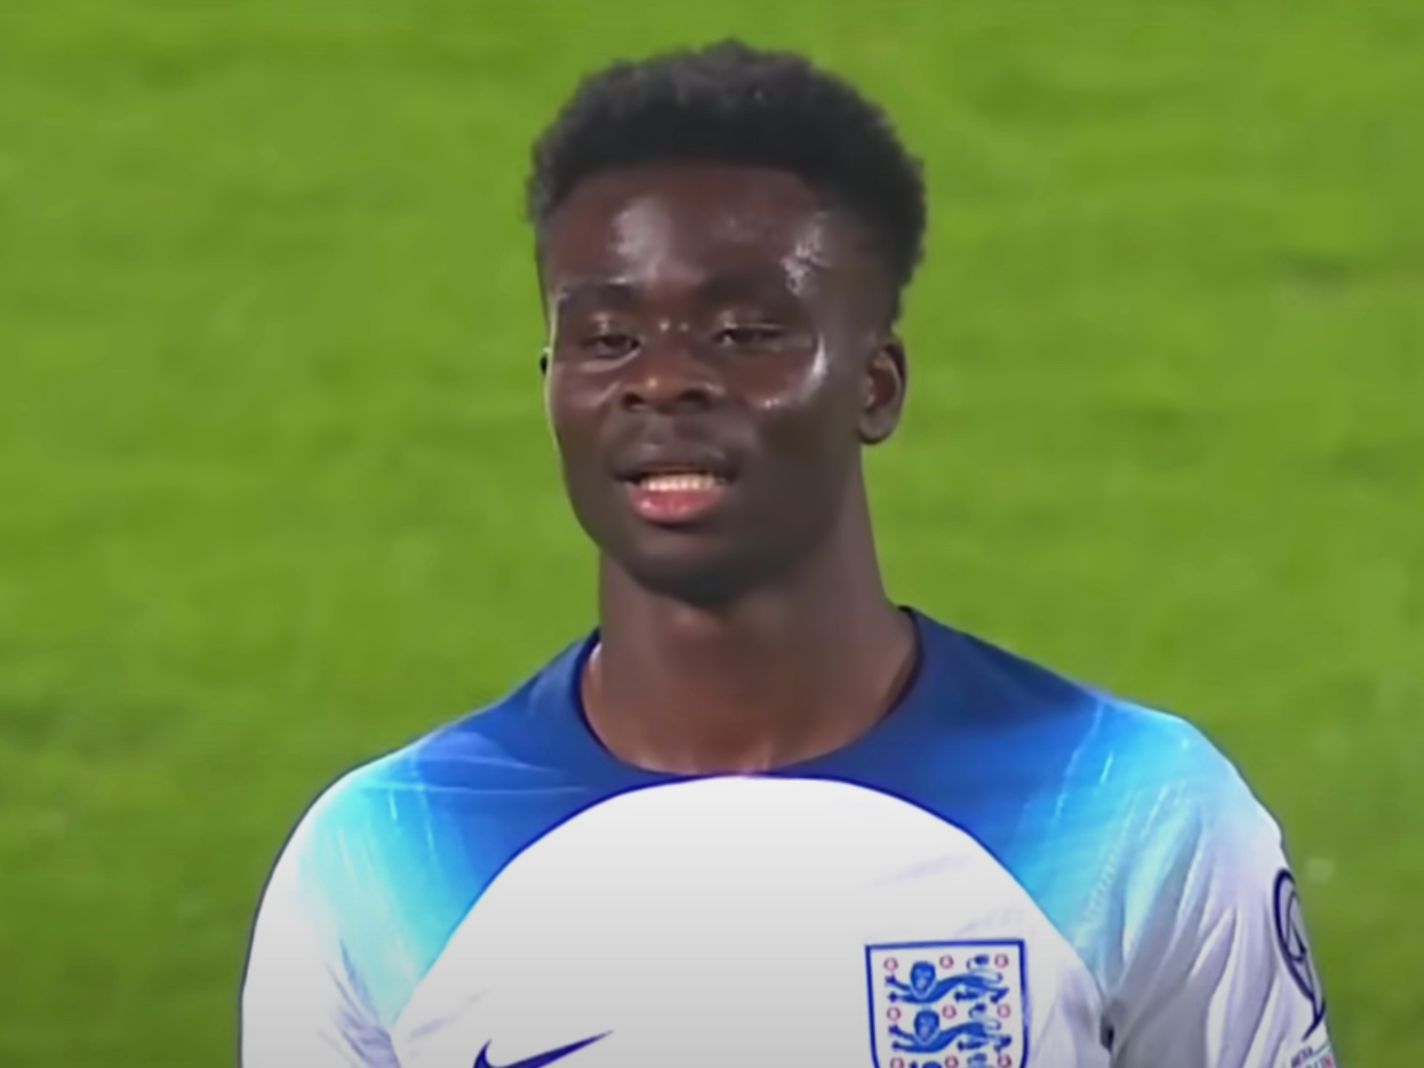 England Fans Unveil New Bukayo Saka Chant Sung To Voulez Vous From ABBA